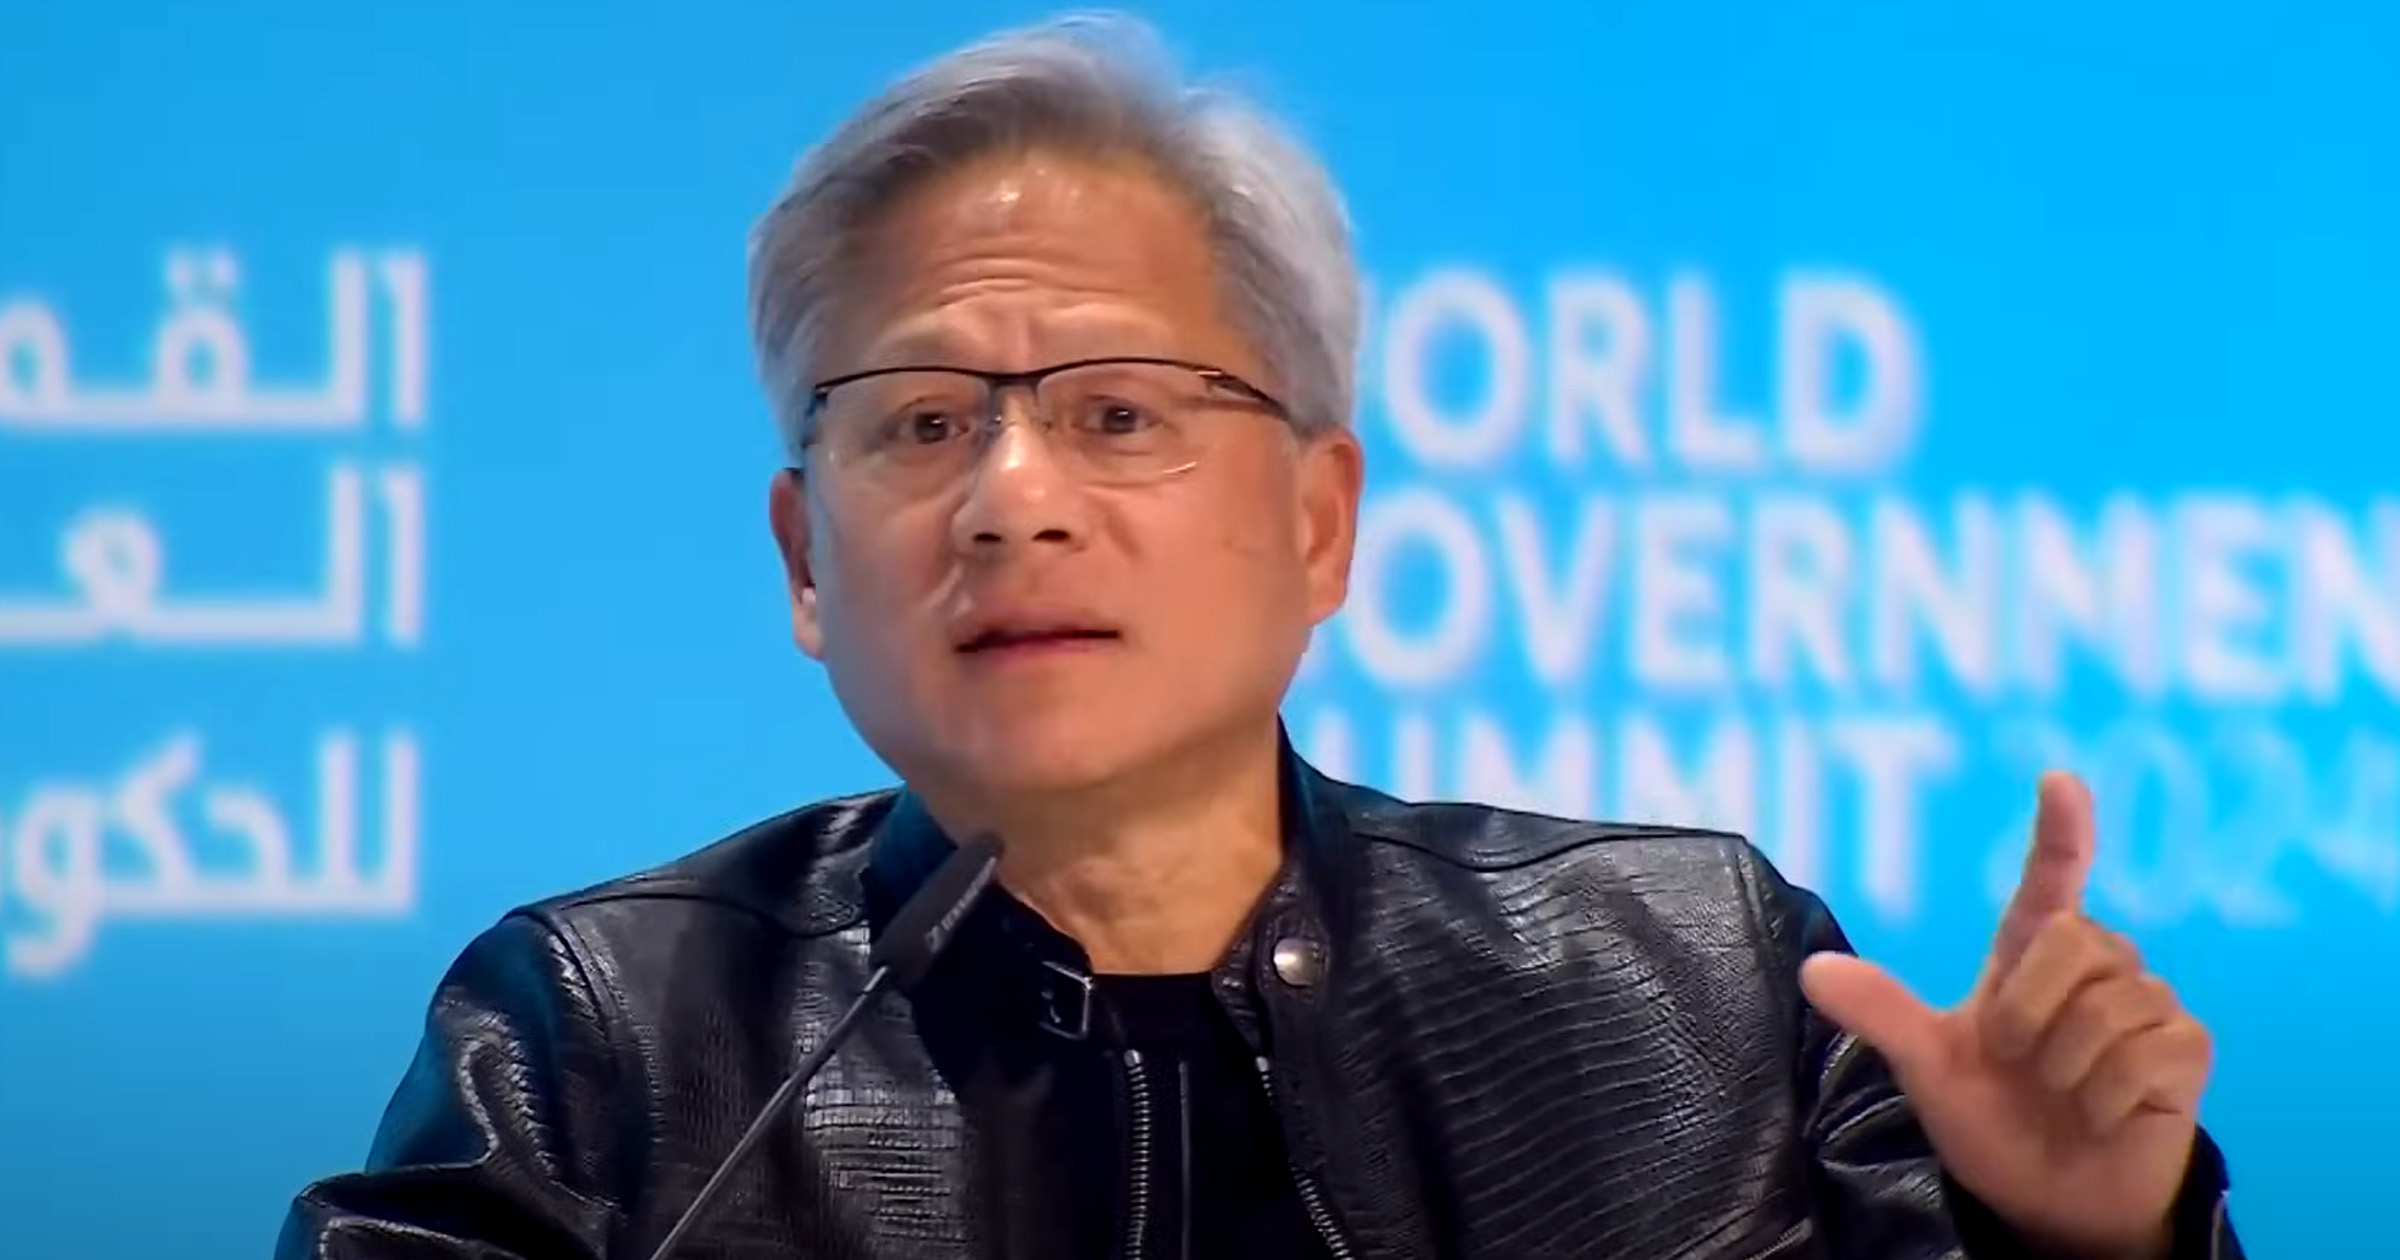 Don't learn to code: Nvidia's founder Jensen Huang advises a different career path